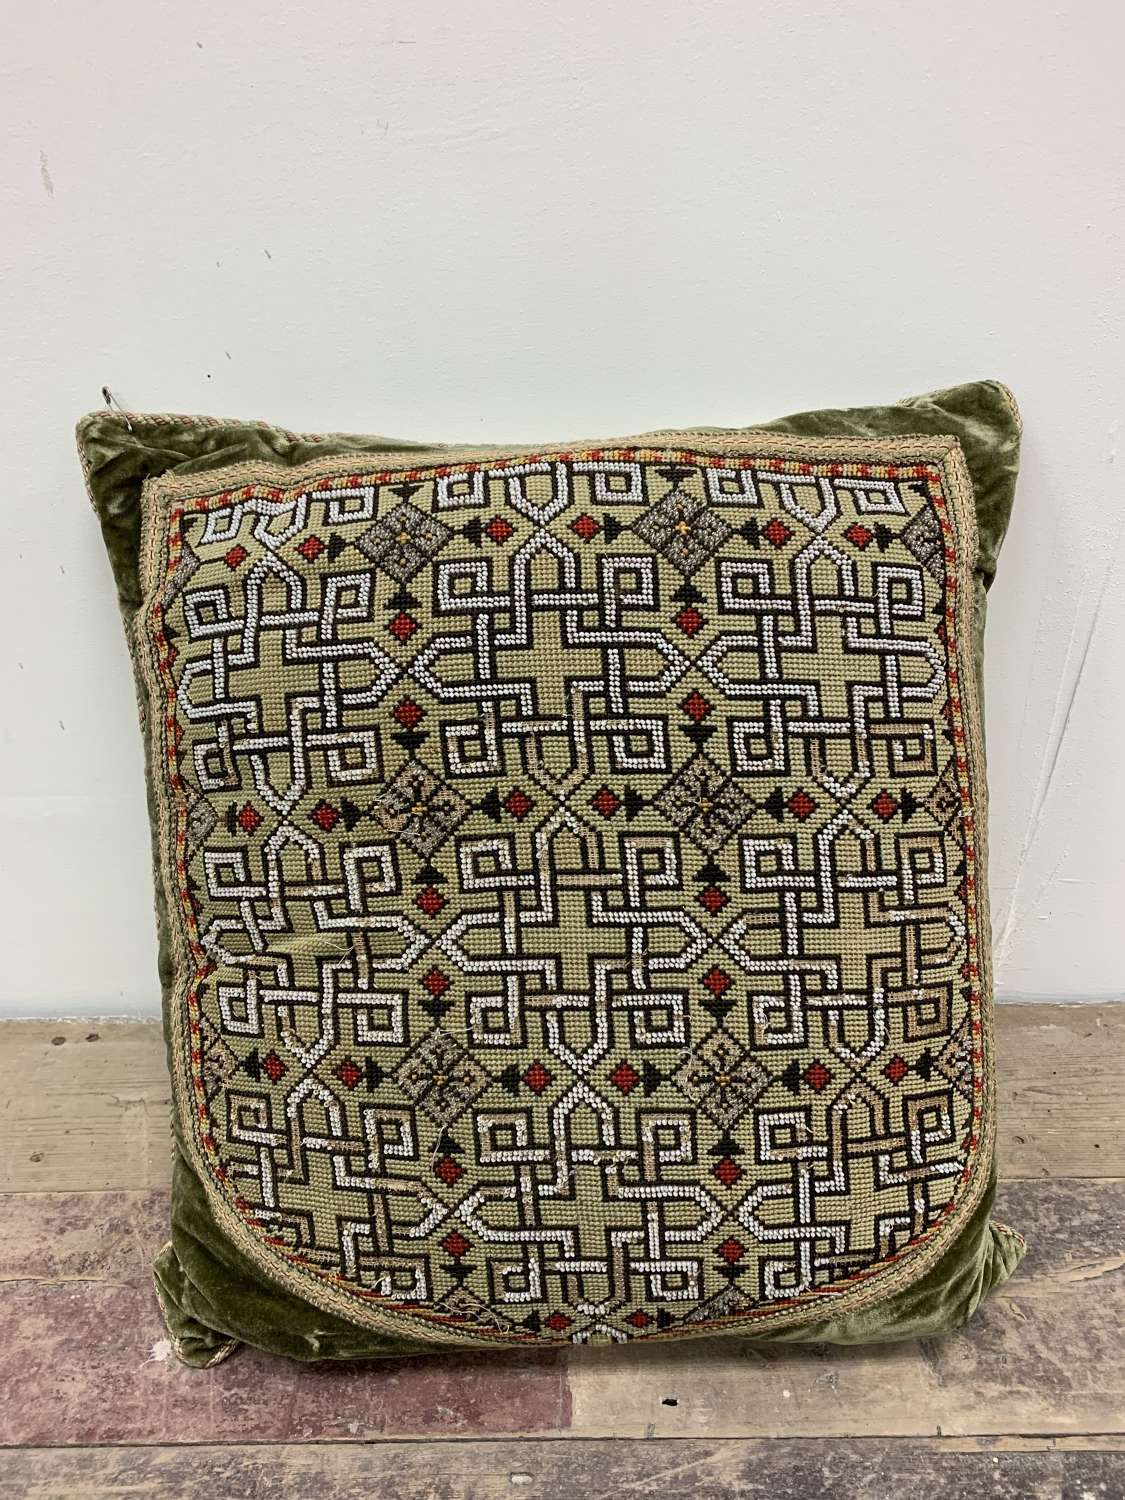 Late C19th century Green cushion with applied needle work & bead work